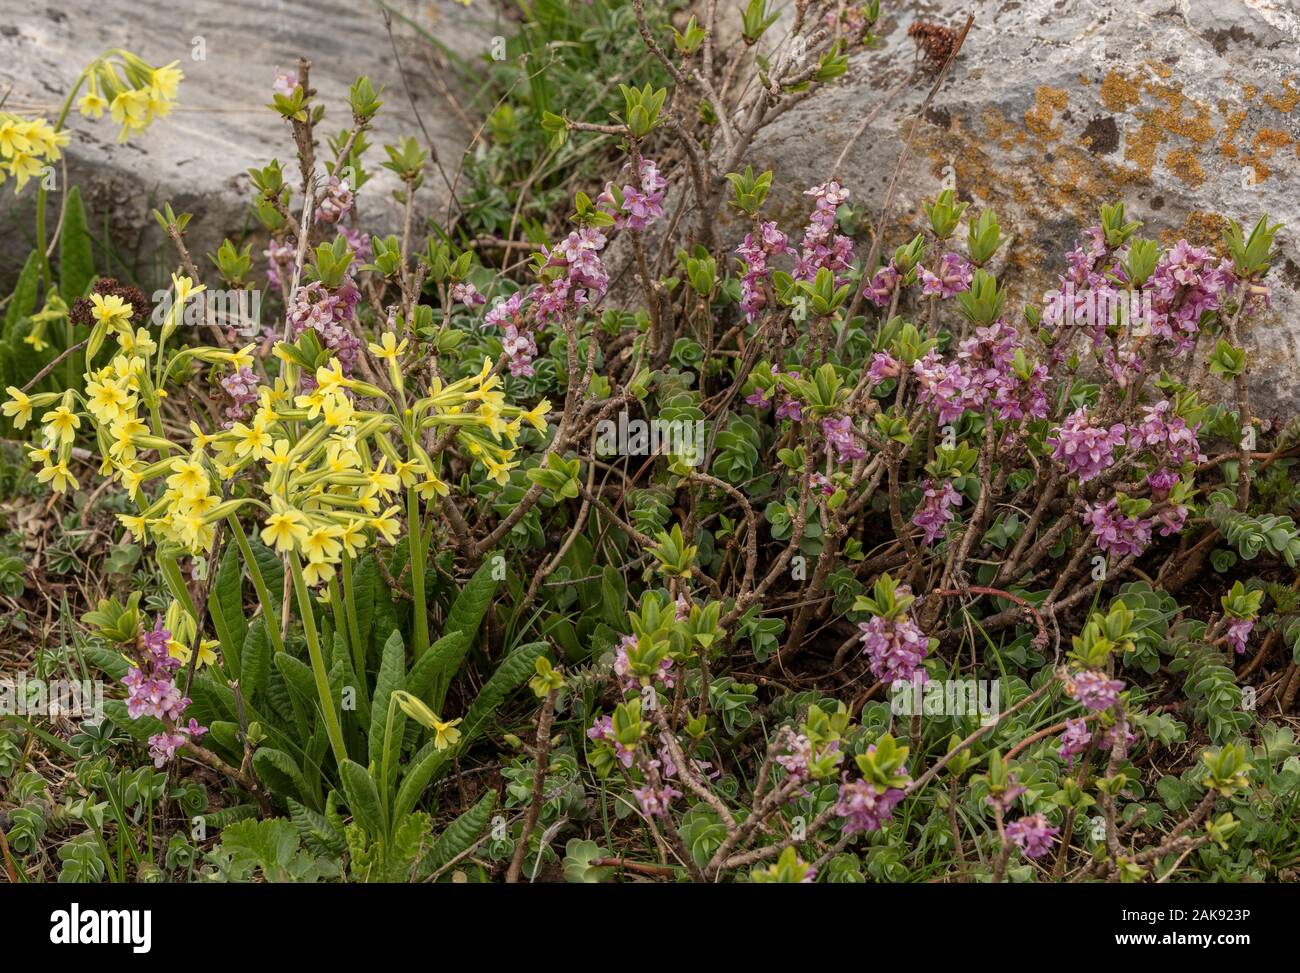 Mezereon, Daphne mezereum, and Oxlips on limestone in flower in early spring, Maritime Alps. Stock Photo